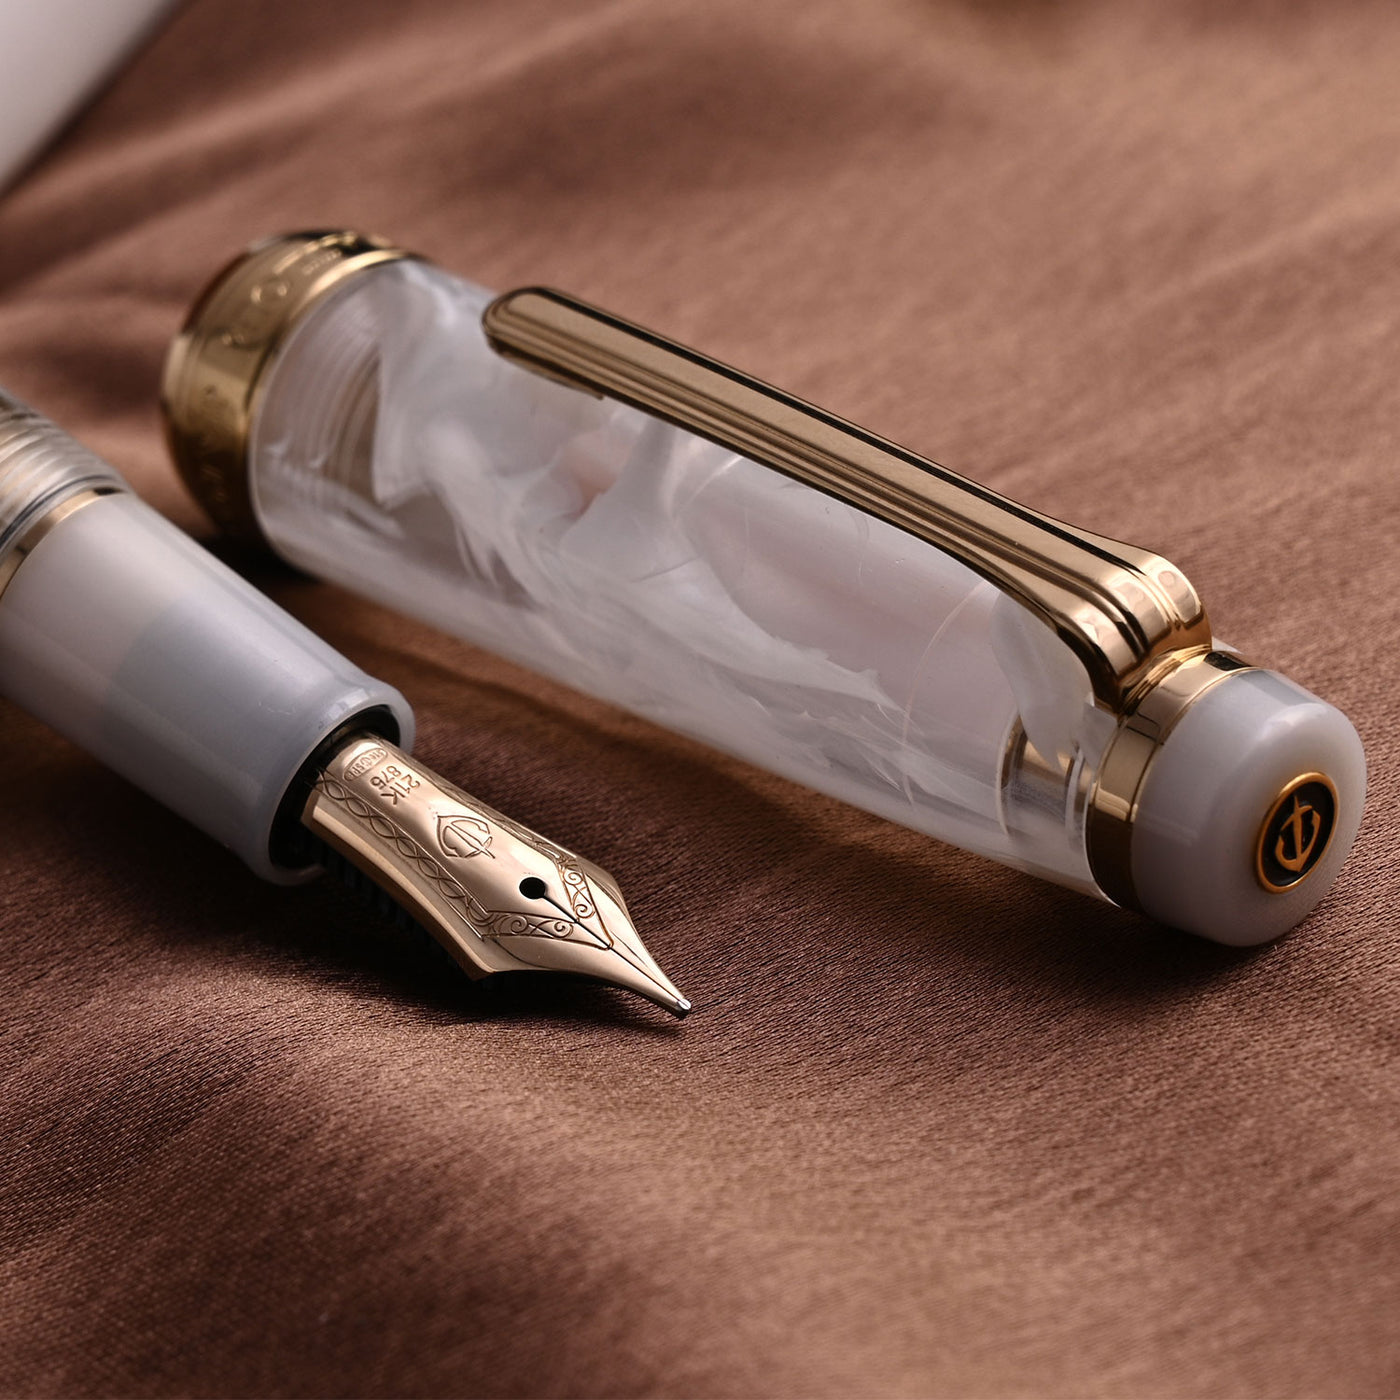 Sailor Professional Gear Slim Veilio Fountain Pen Pearl White GT (Limited Production) 8